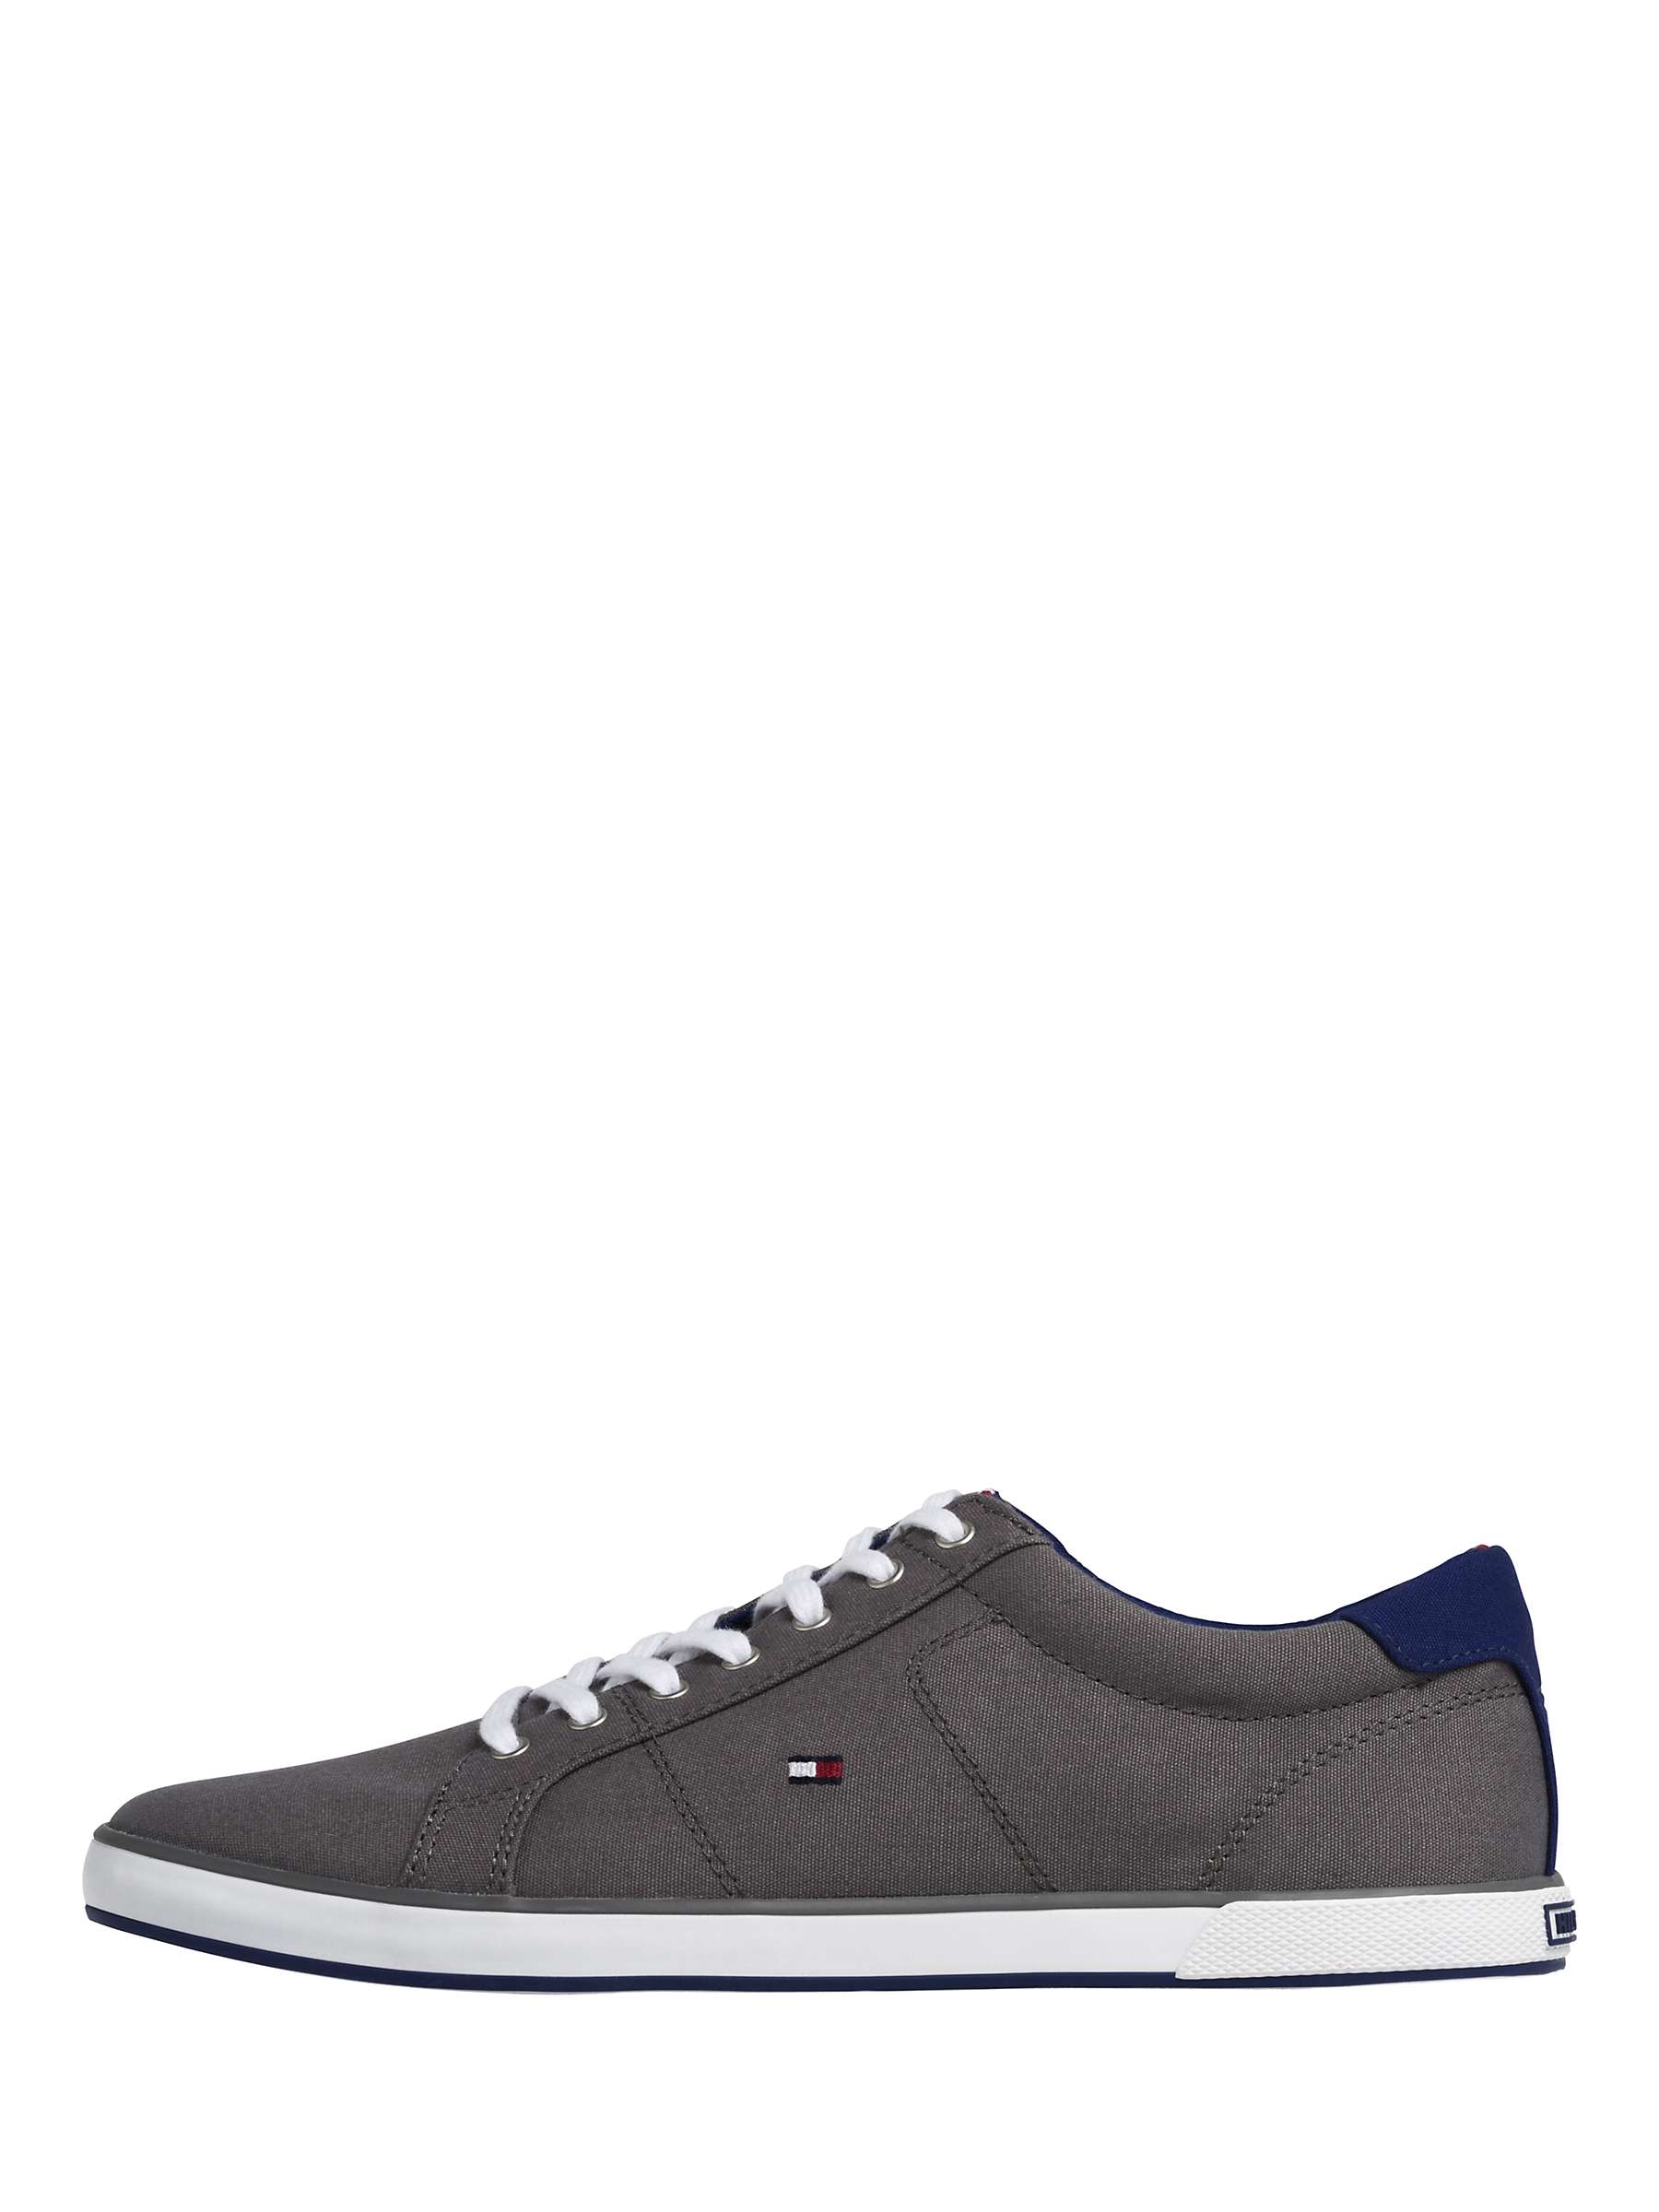 Tommy Hilfiger Canvas Lace-Up Trainers, Steel Grey at John Lewis & Partners